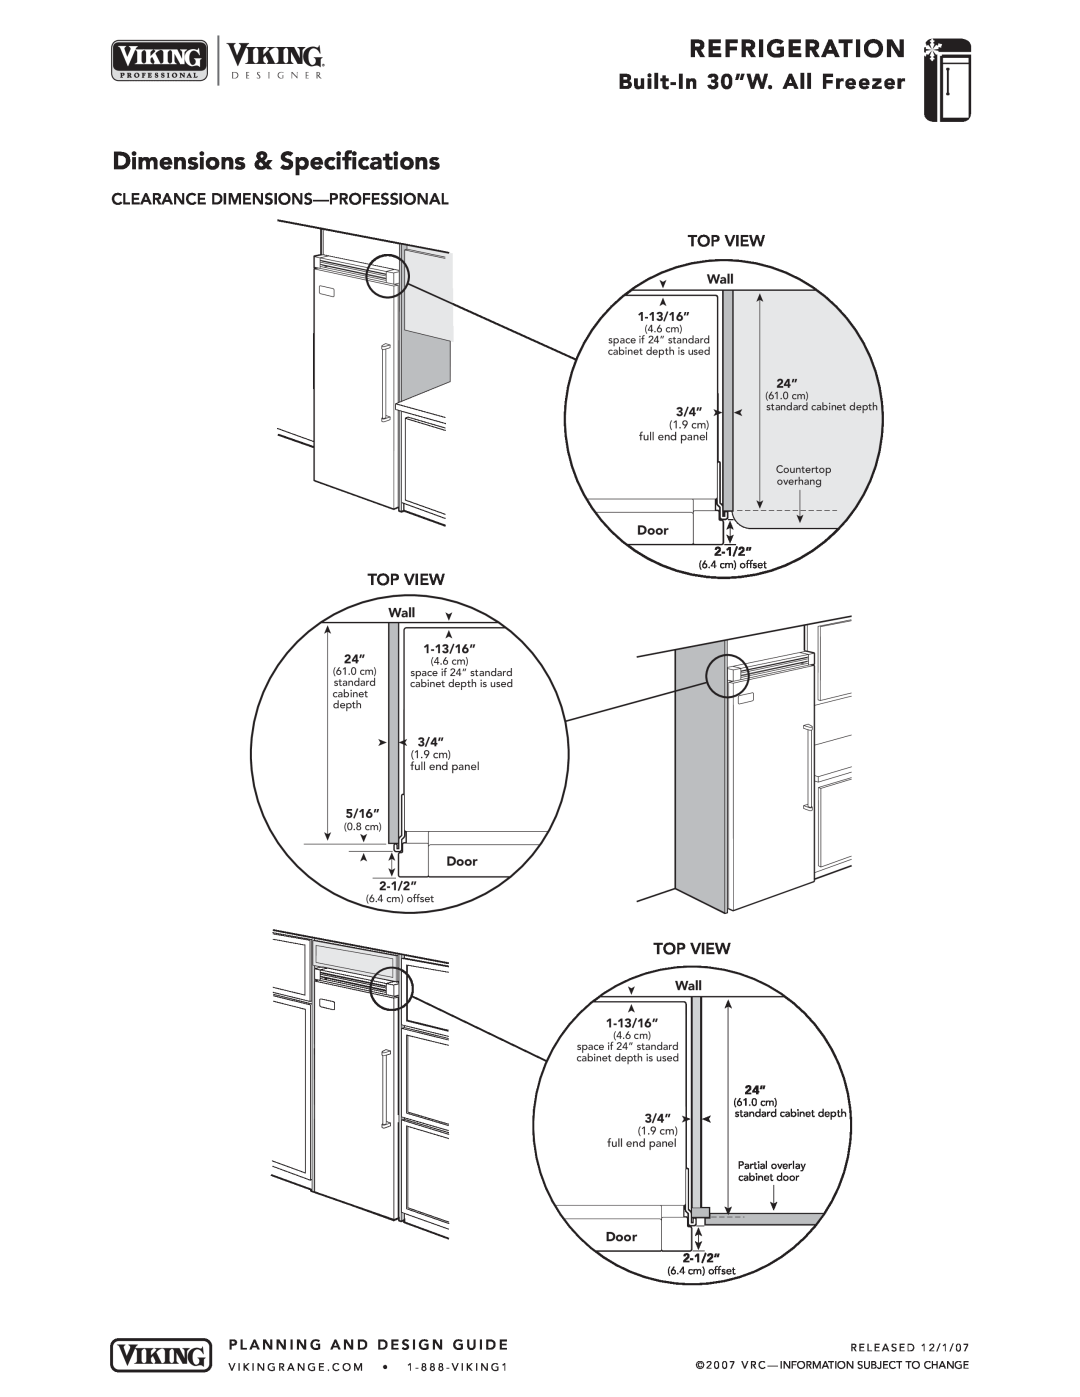 Viking DDFB Clearance Dimensions-Professional, Top View, Dimensions & Specifications, Refrigeration, Wall, 1-13/16”, 3/4” 